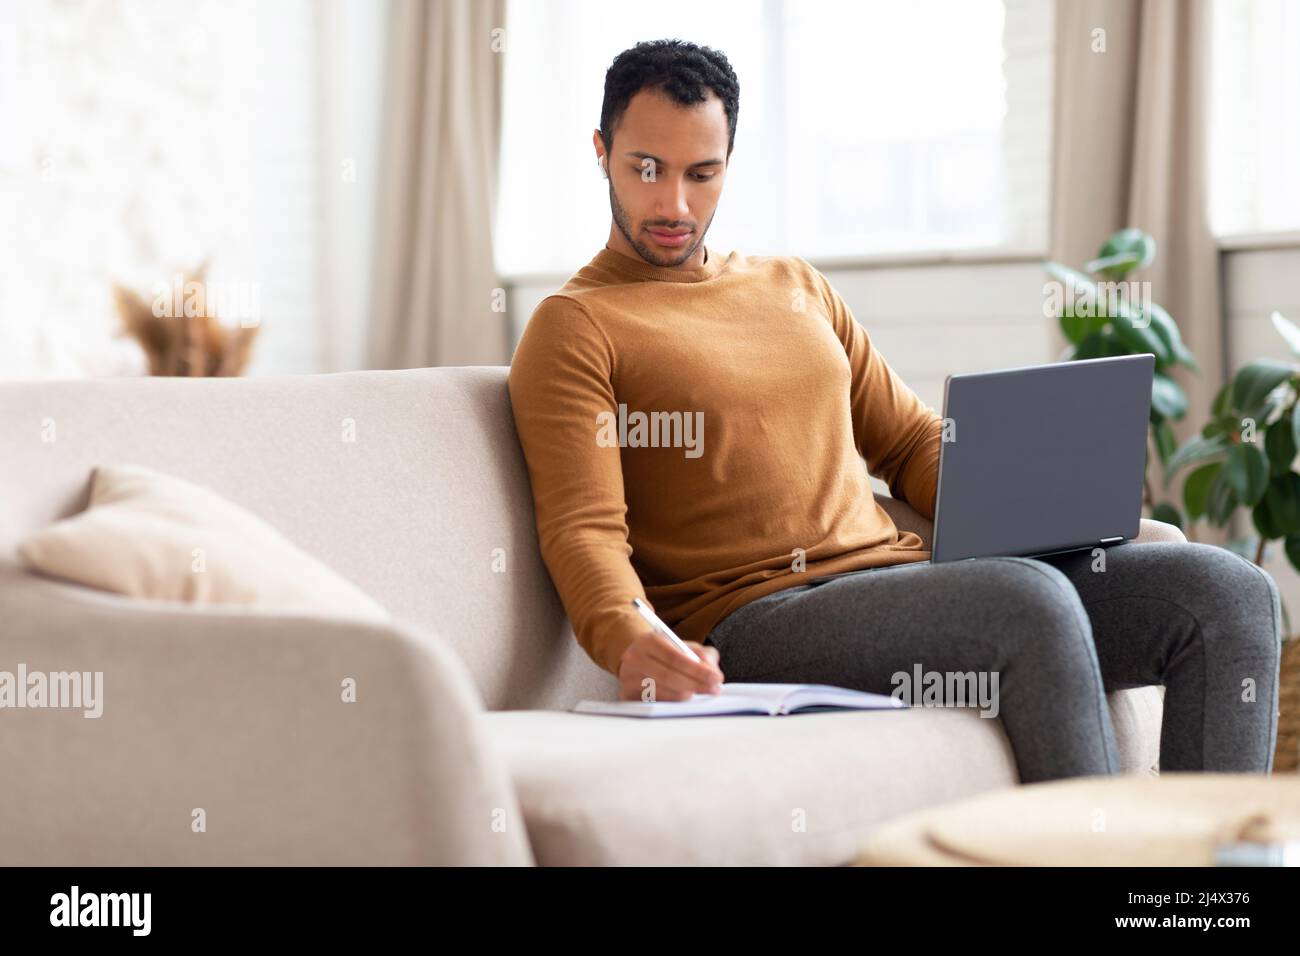 Portrait of focused Arab man using laptop and writing Stock Photo